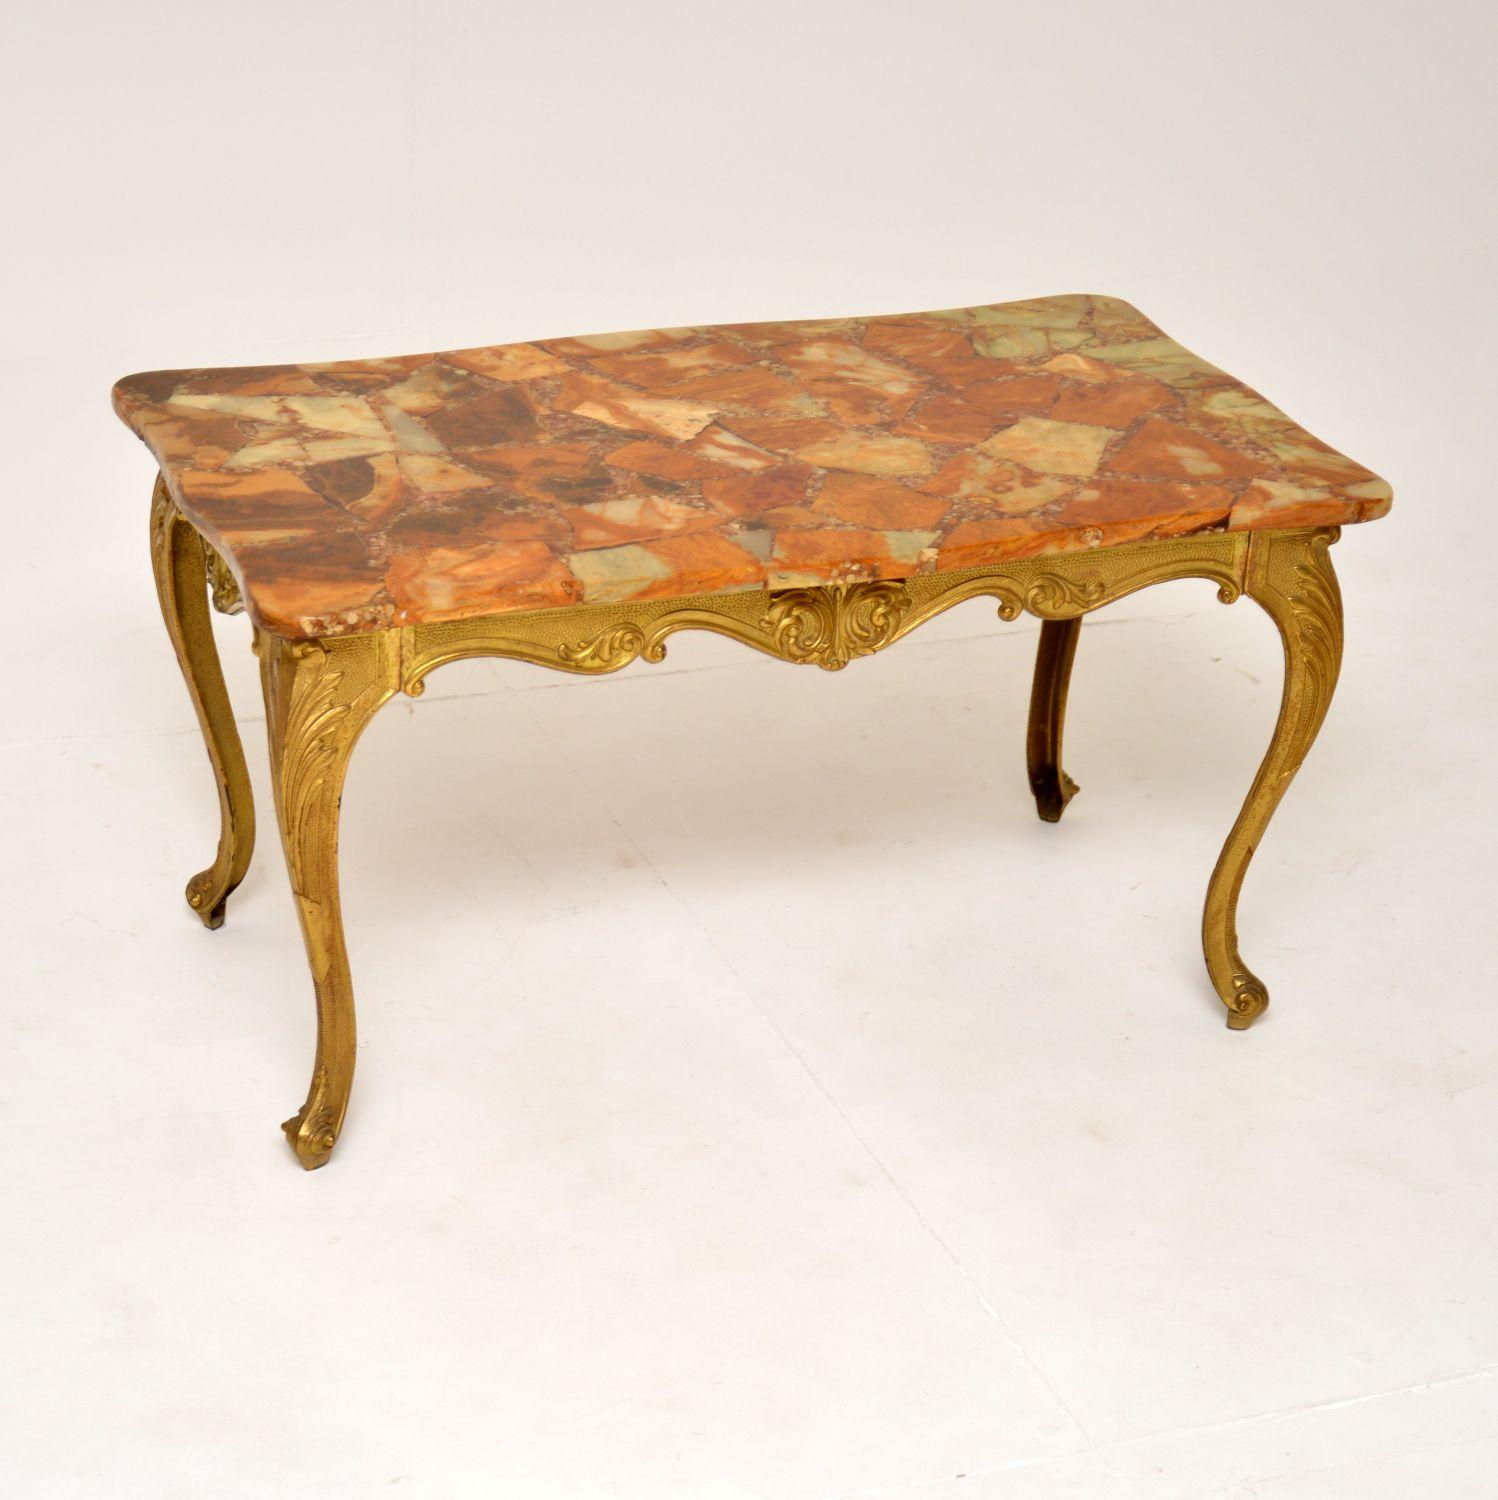 A beautiful antique coffee table with a fine quality solid brass frame and onyx top. This was made in France, it dates from the 1930-50’s.

It is very well made, the brass frame has a gorgeous shape and very fine details. The onyx top is quite